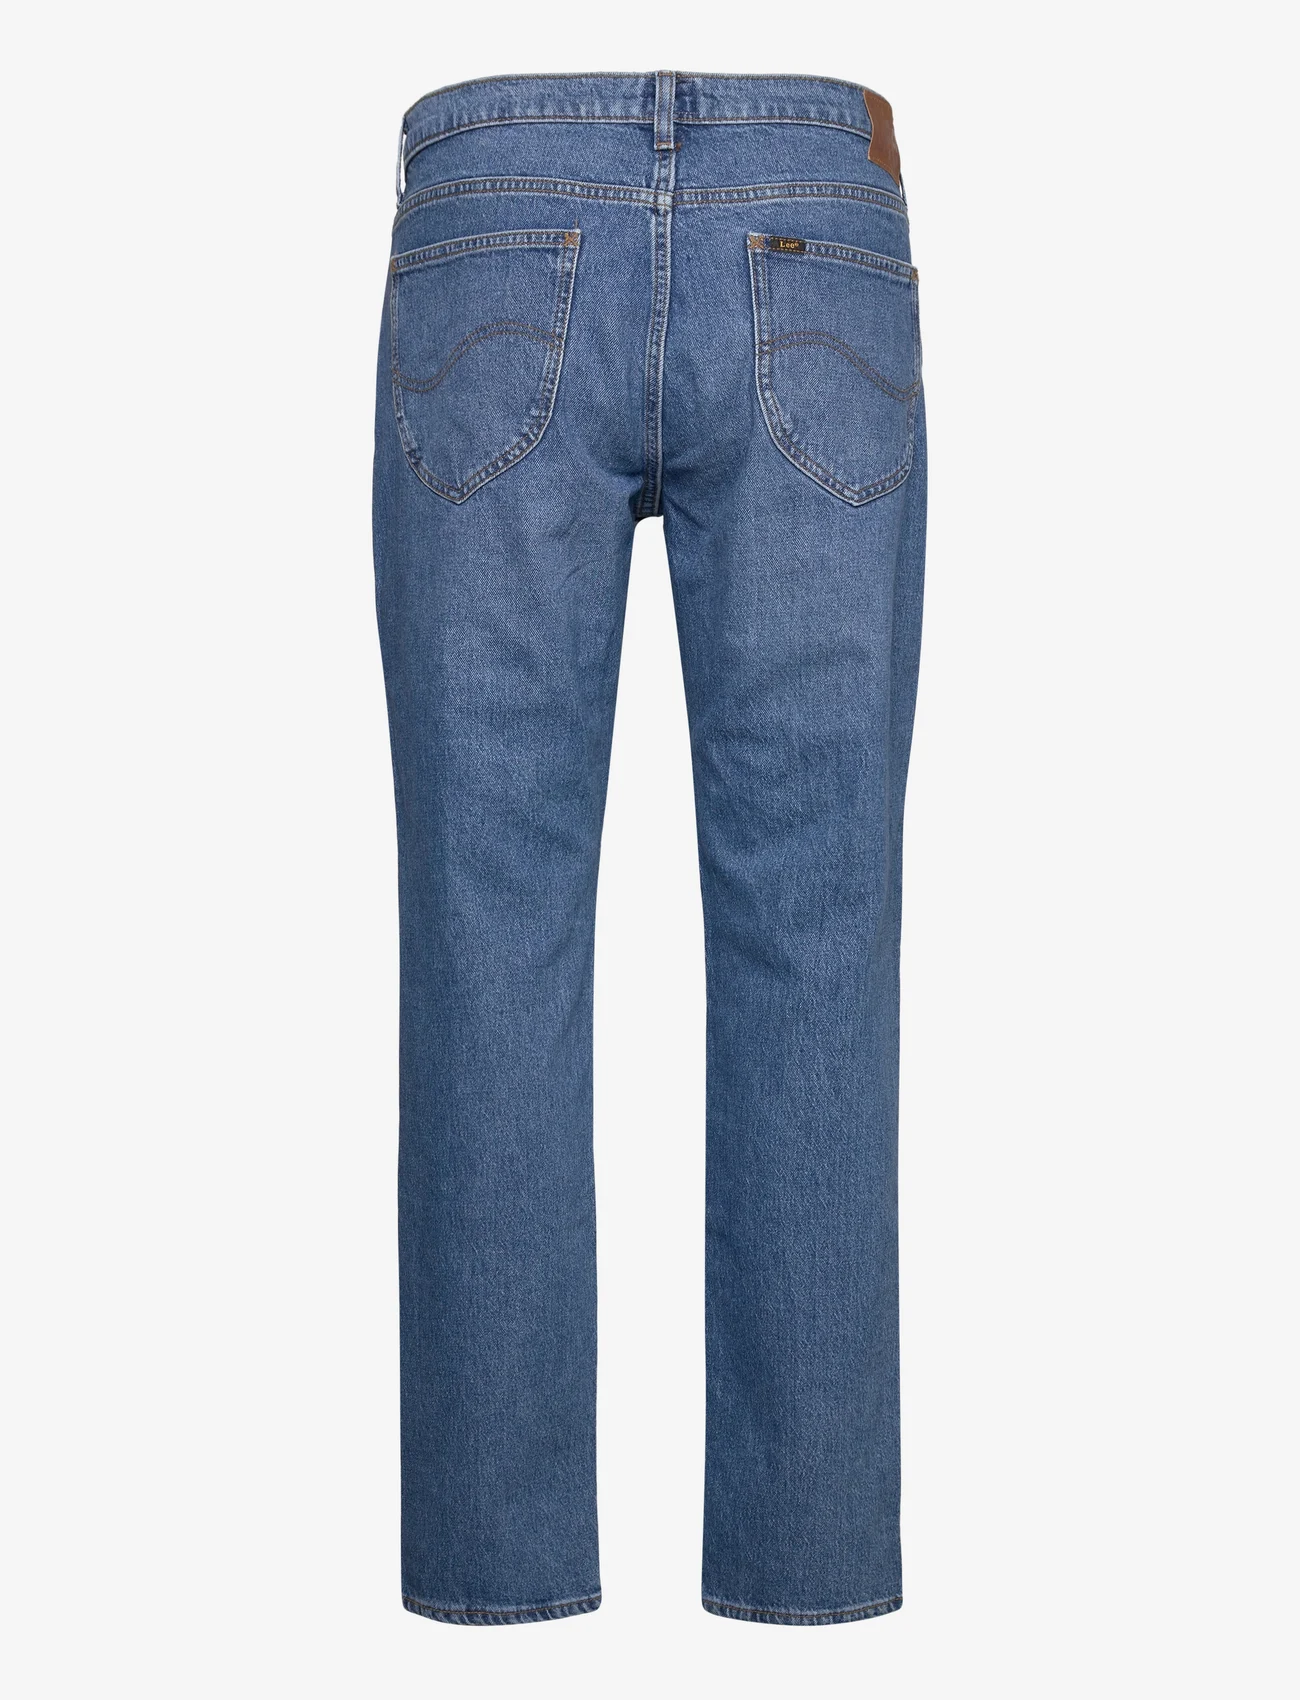 Lee Jeans - WEST - regular jeans - into the blue worn - 1